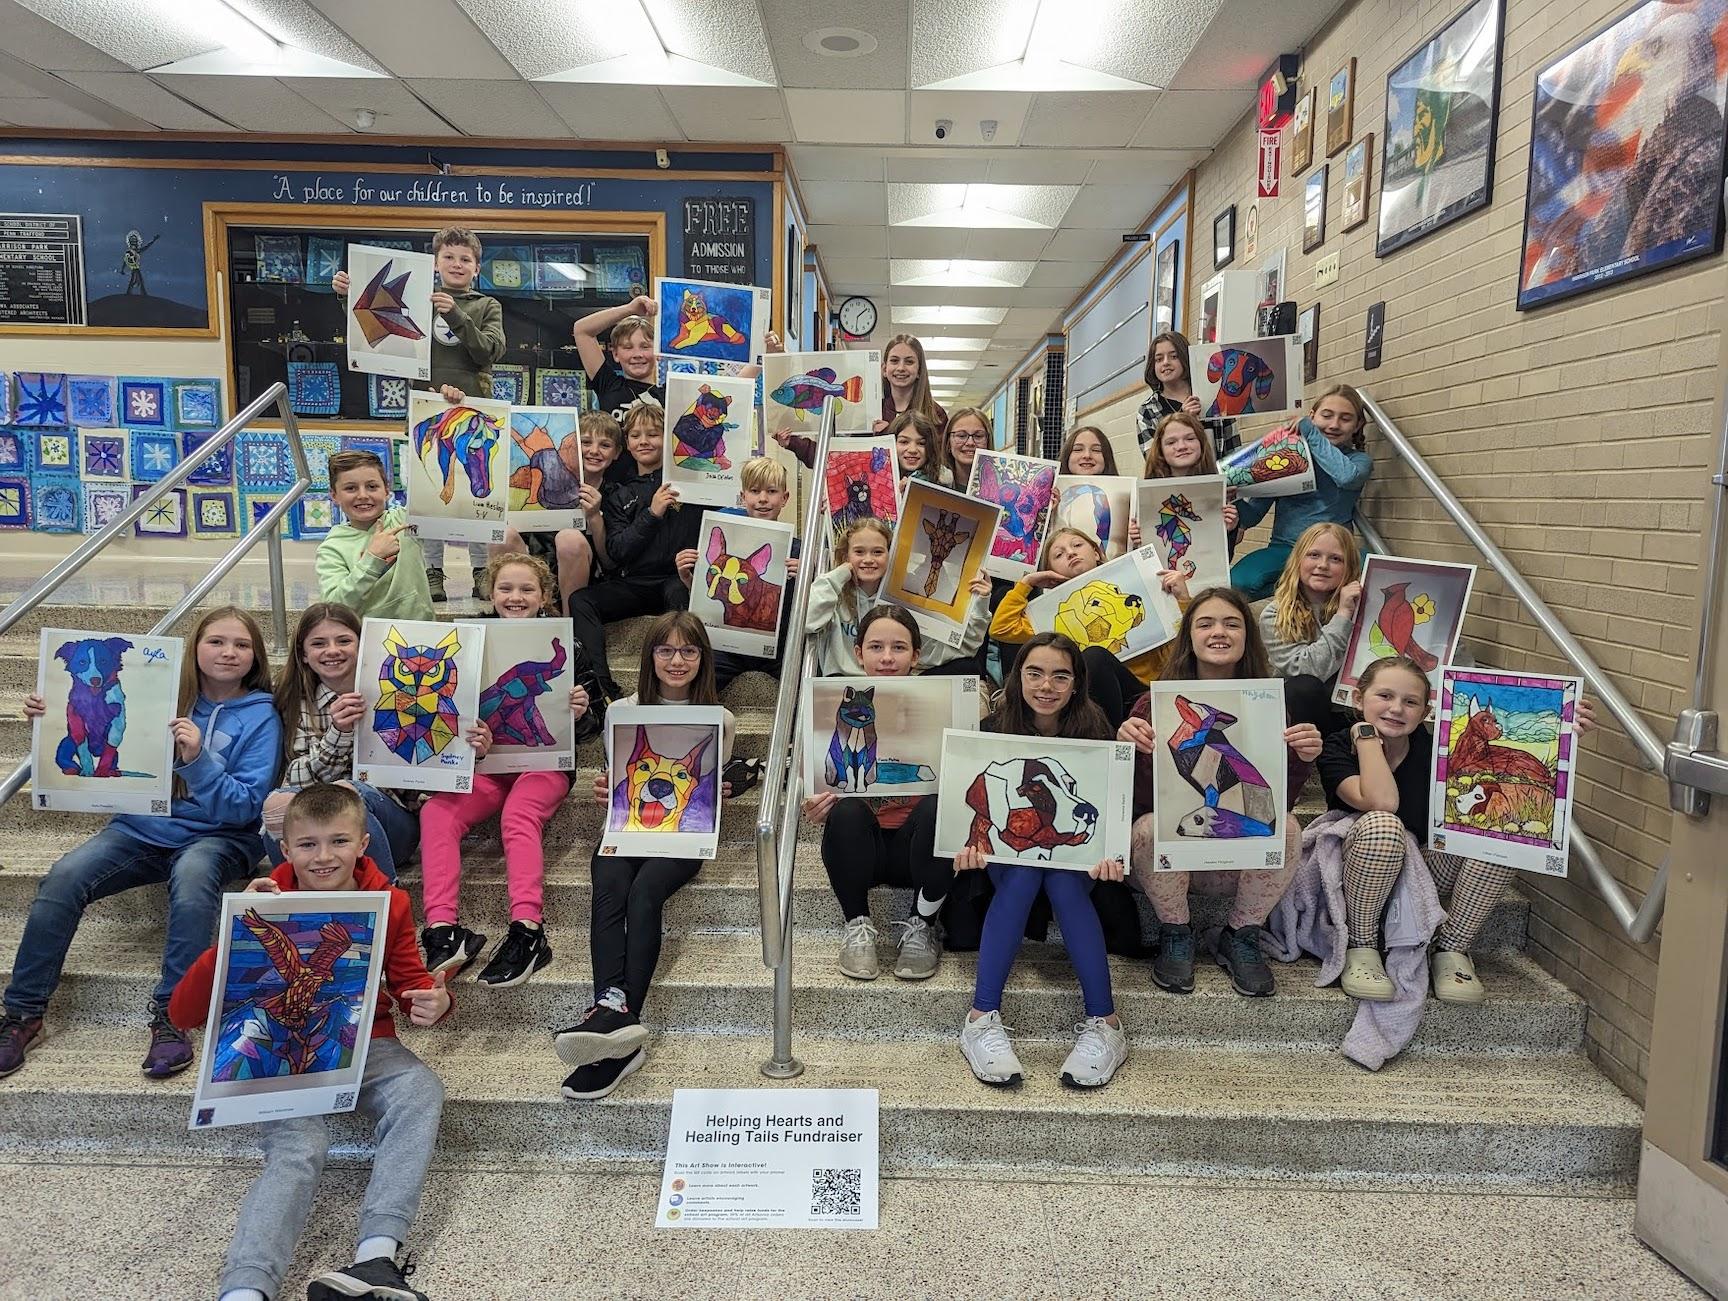 Harrison Park students display their works of art which are available for sale